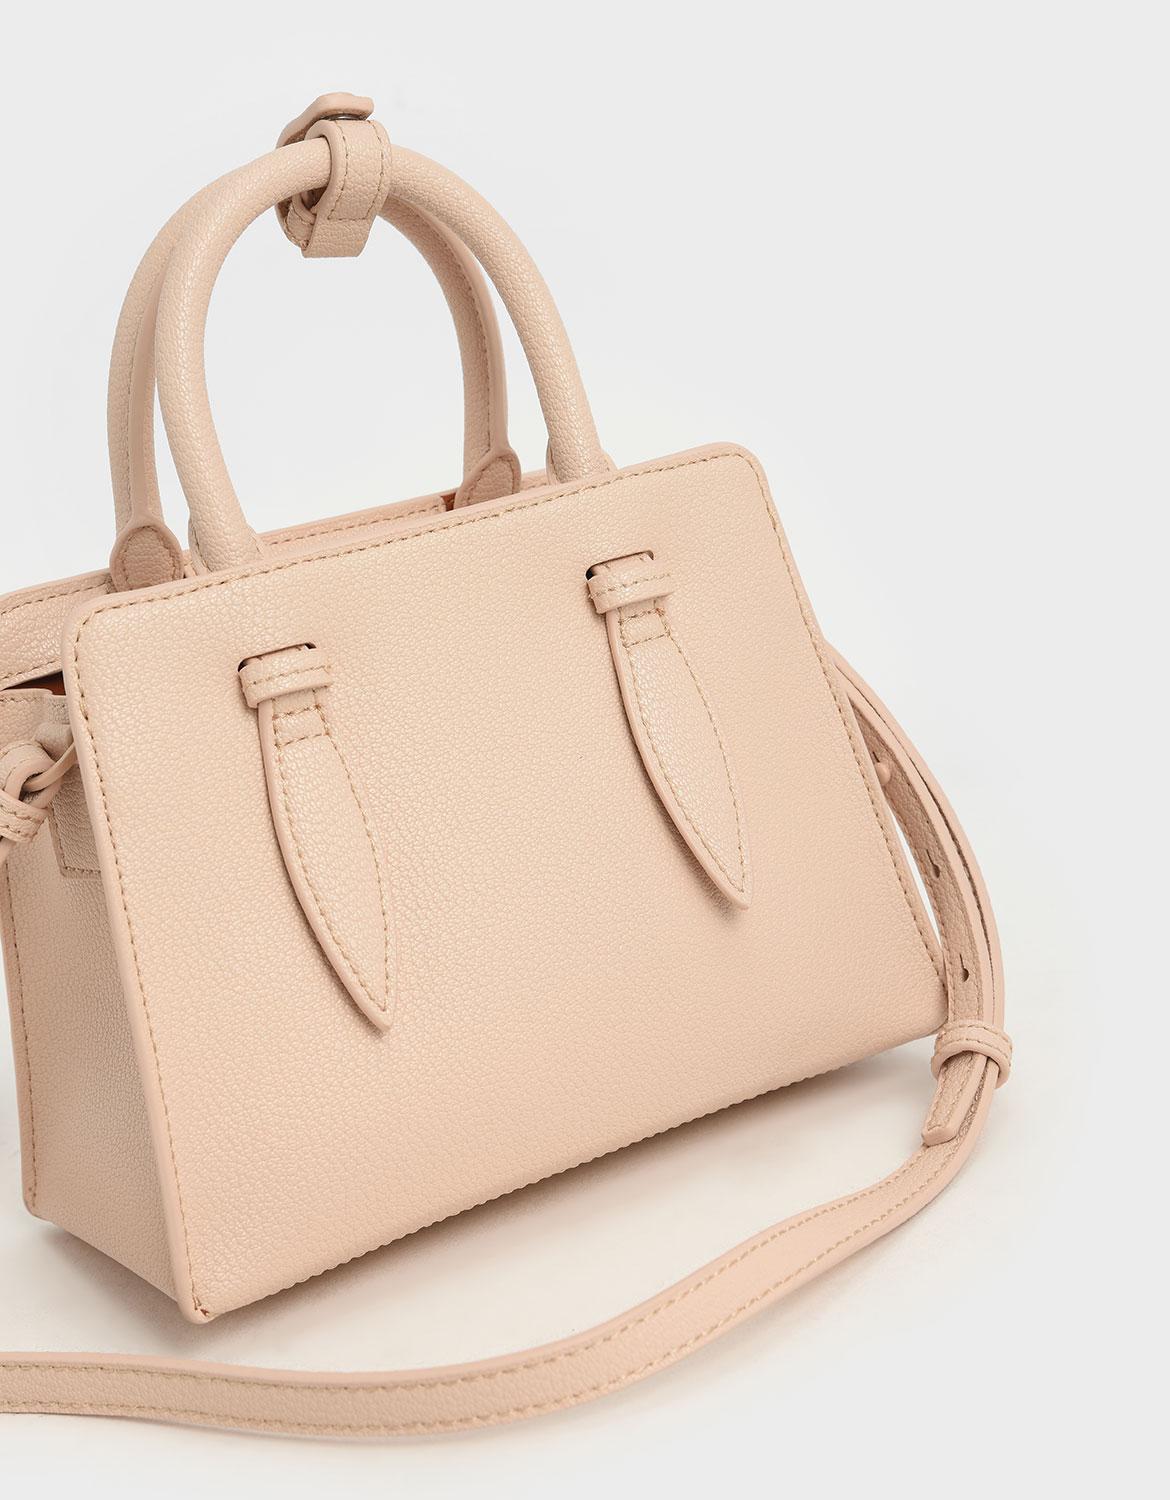 Charles & Keith Double Top Handle Structured Bag in Natural